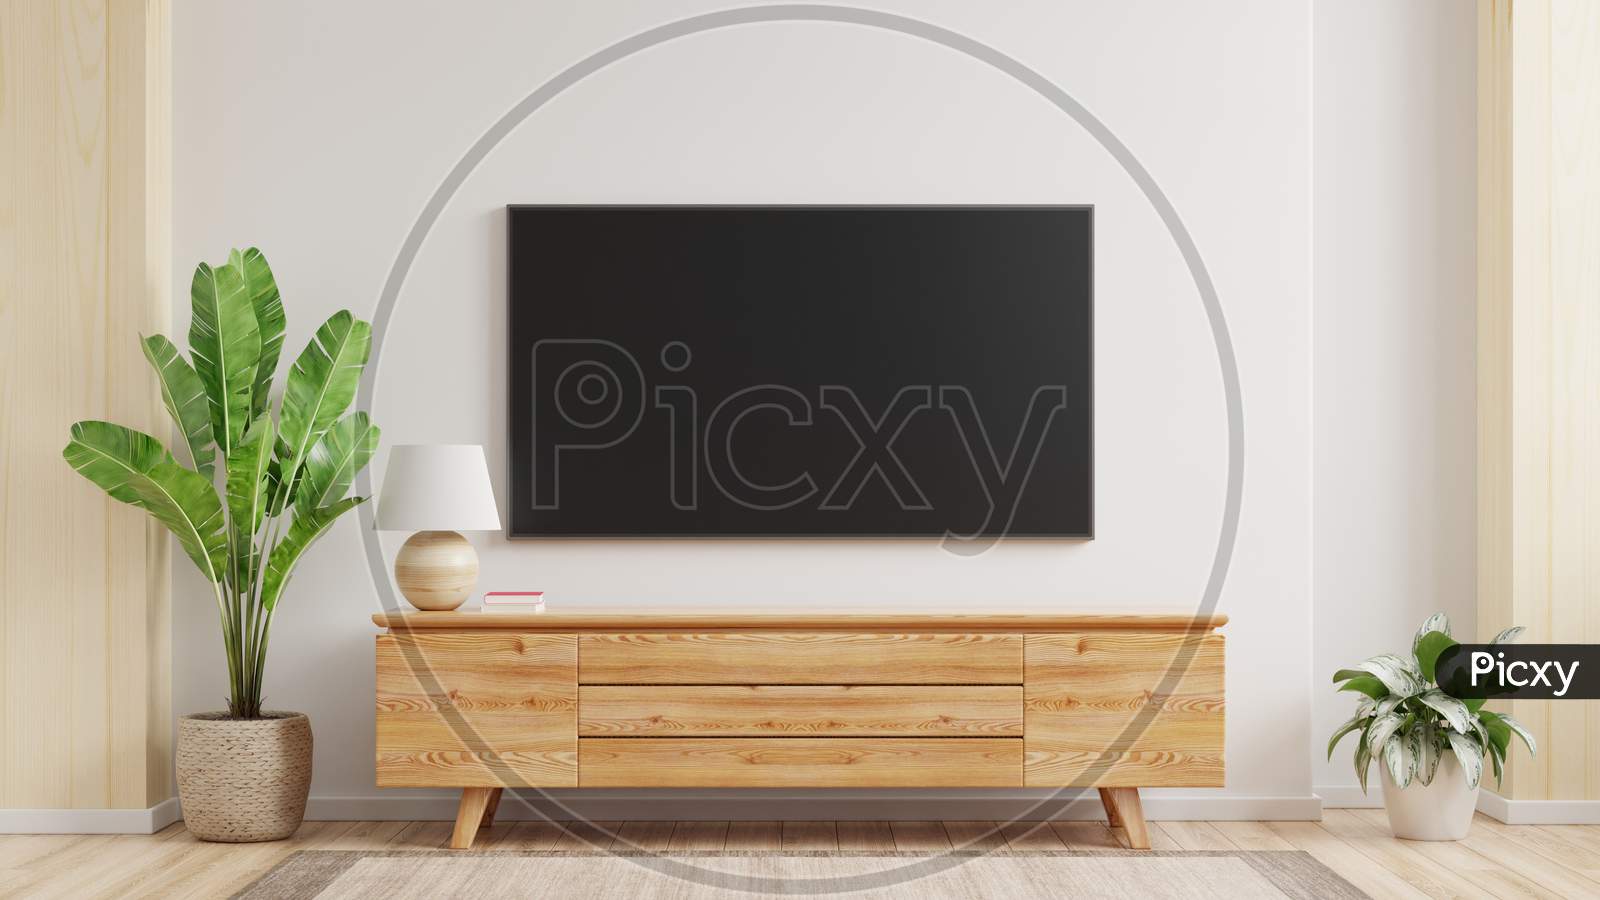 Mockup A Tv Wall Mounted In A Living Room Room With A White Wall.